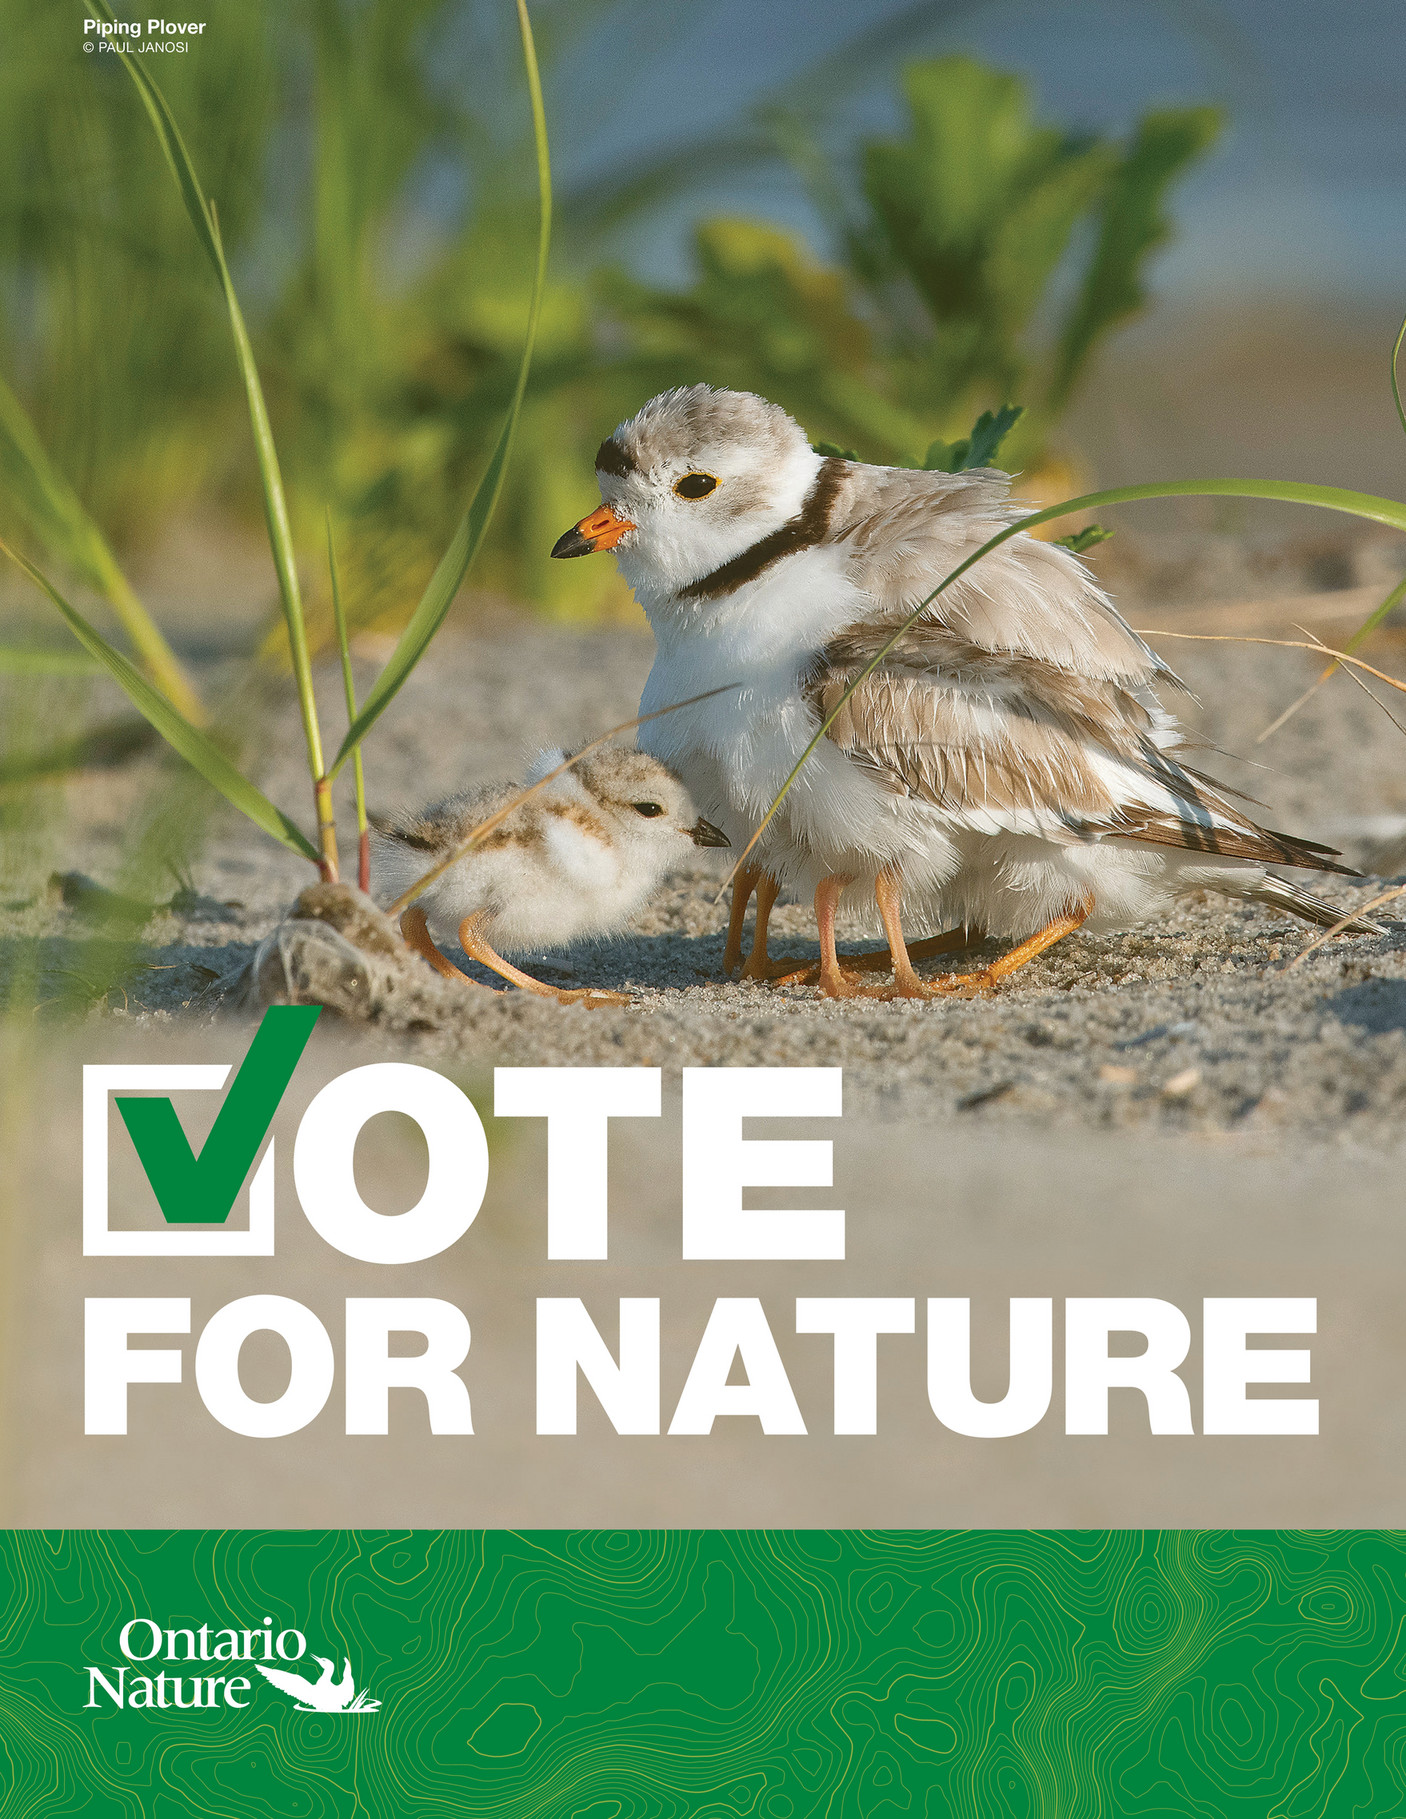 on-nature-magazine-vote-for-nature-page-2-3